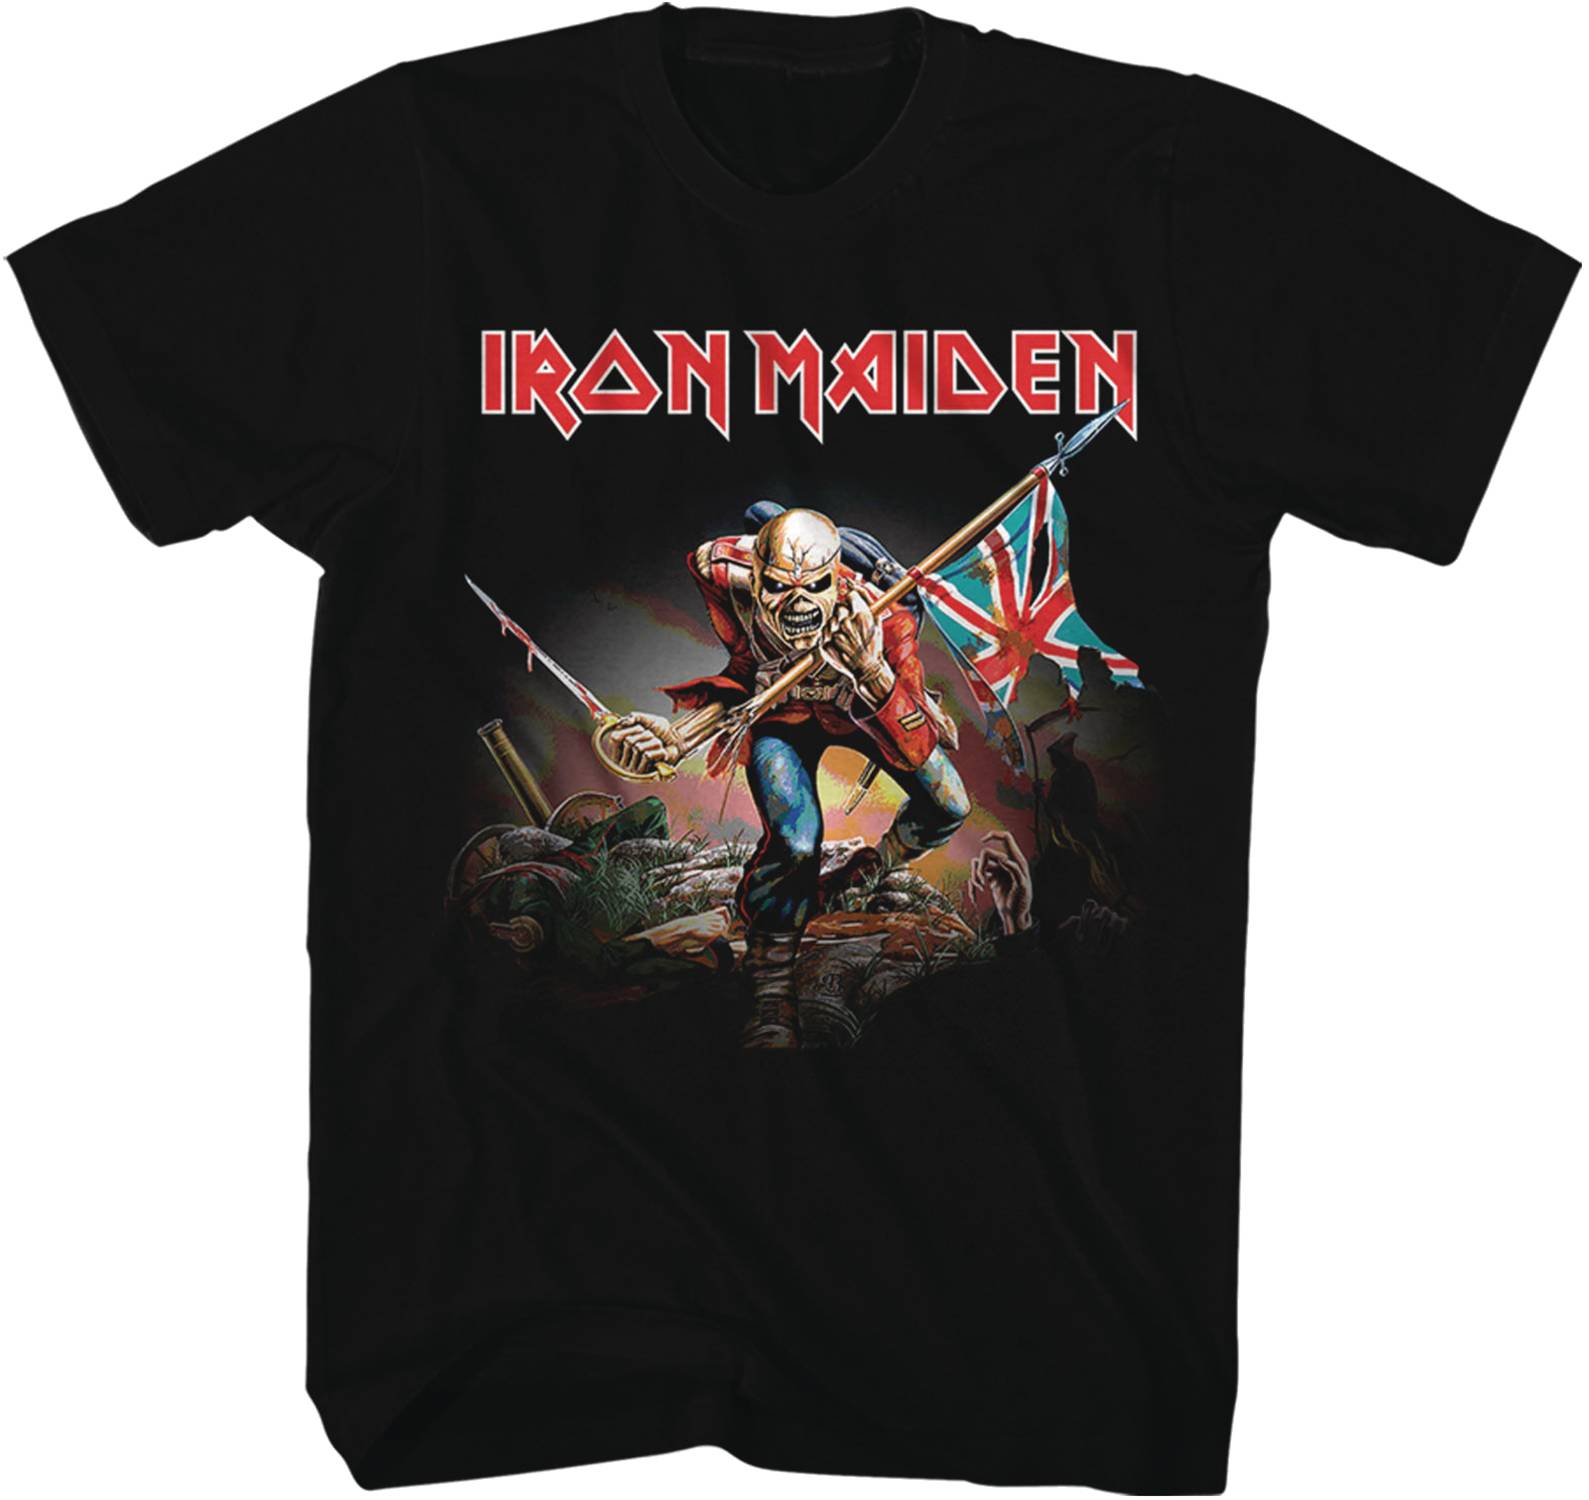 MAY192330 - IRON MAIDEN THE TROOPER T/S SM - Previews World